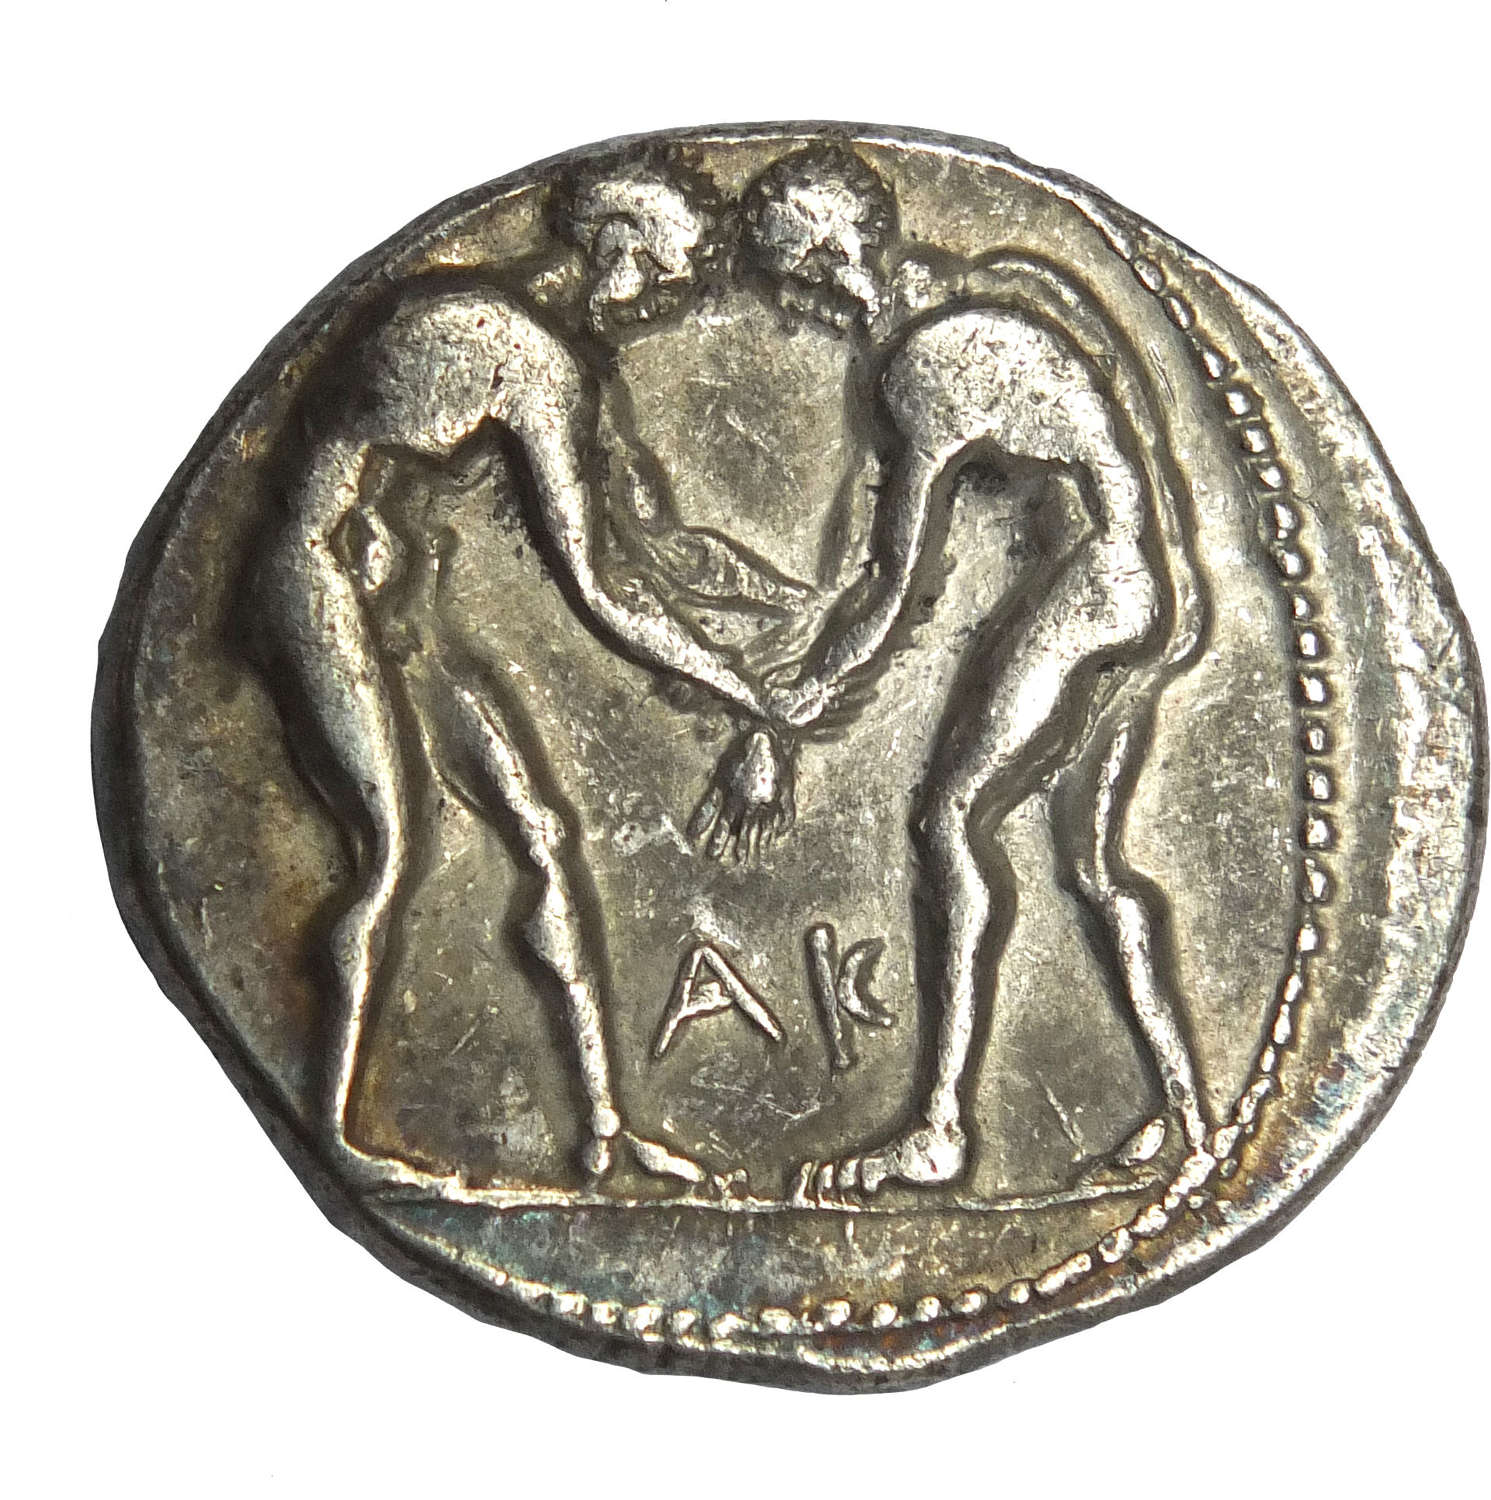 A Pamphylia 'Two Wrestlers' silver stater, c. 380-250 B.C.